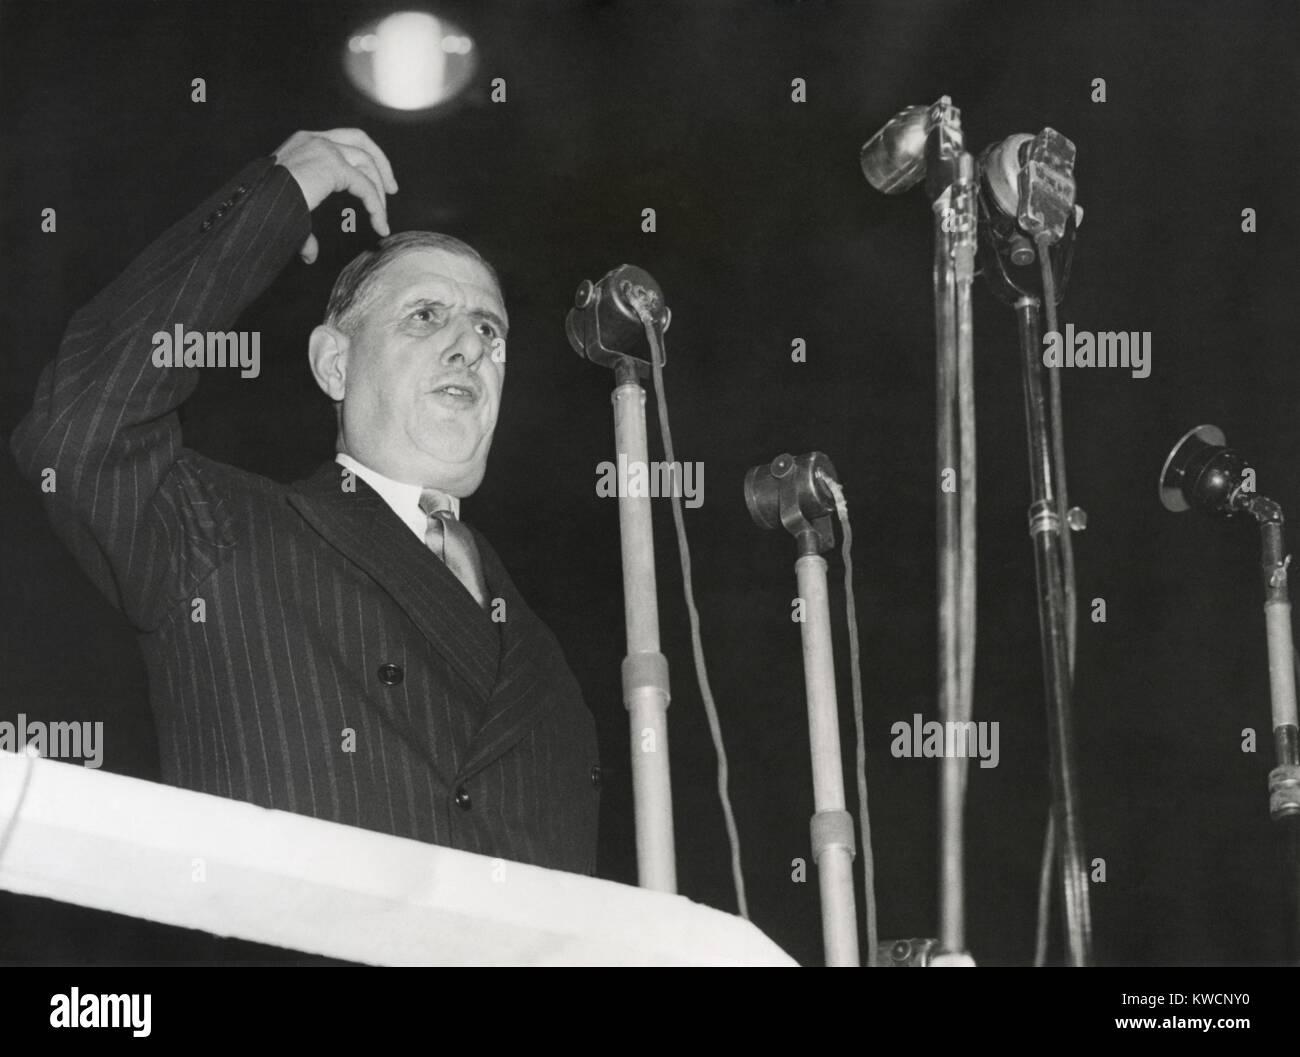 Charles De Gaulle speaking, ca. 1947-50. From April 1947 to May 1953, De Gaulle attempted to achieve national leadership through his French People's Party. He finally became Prime Minister in June 1958. - (BSLOC_2014_15_238) Stock Photo